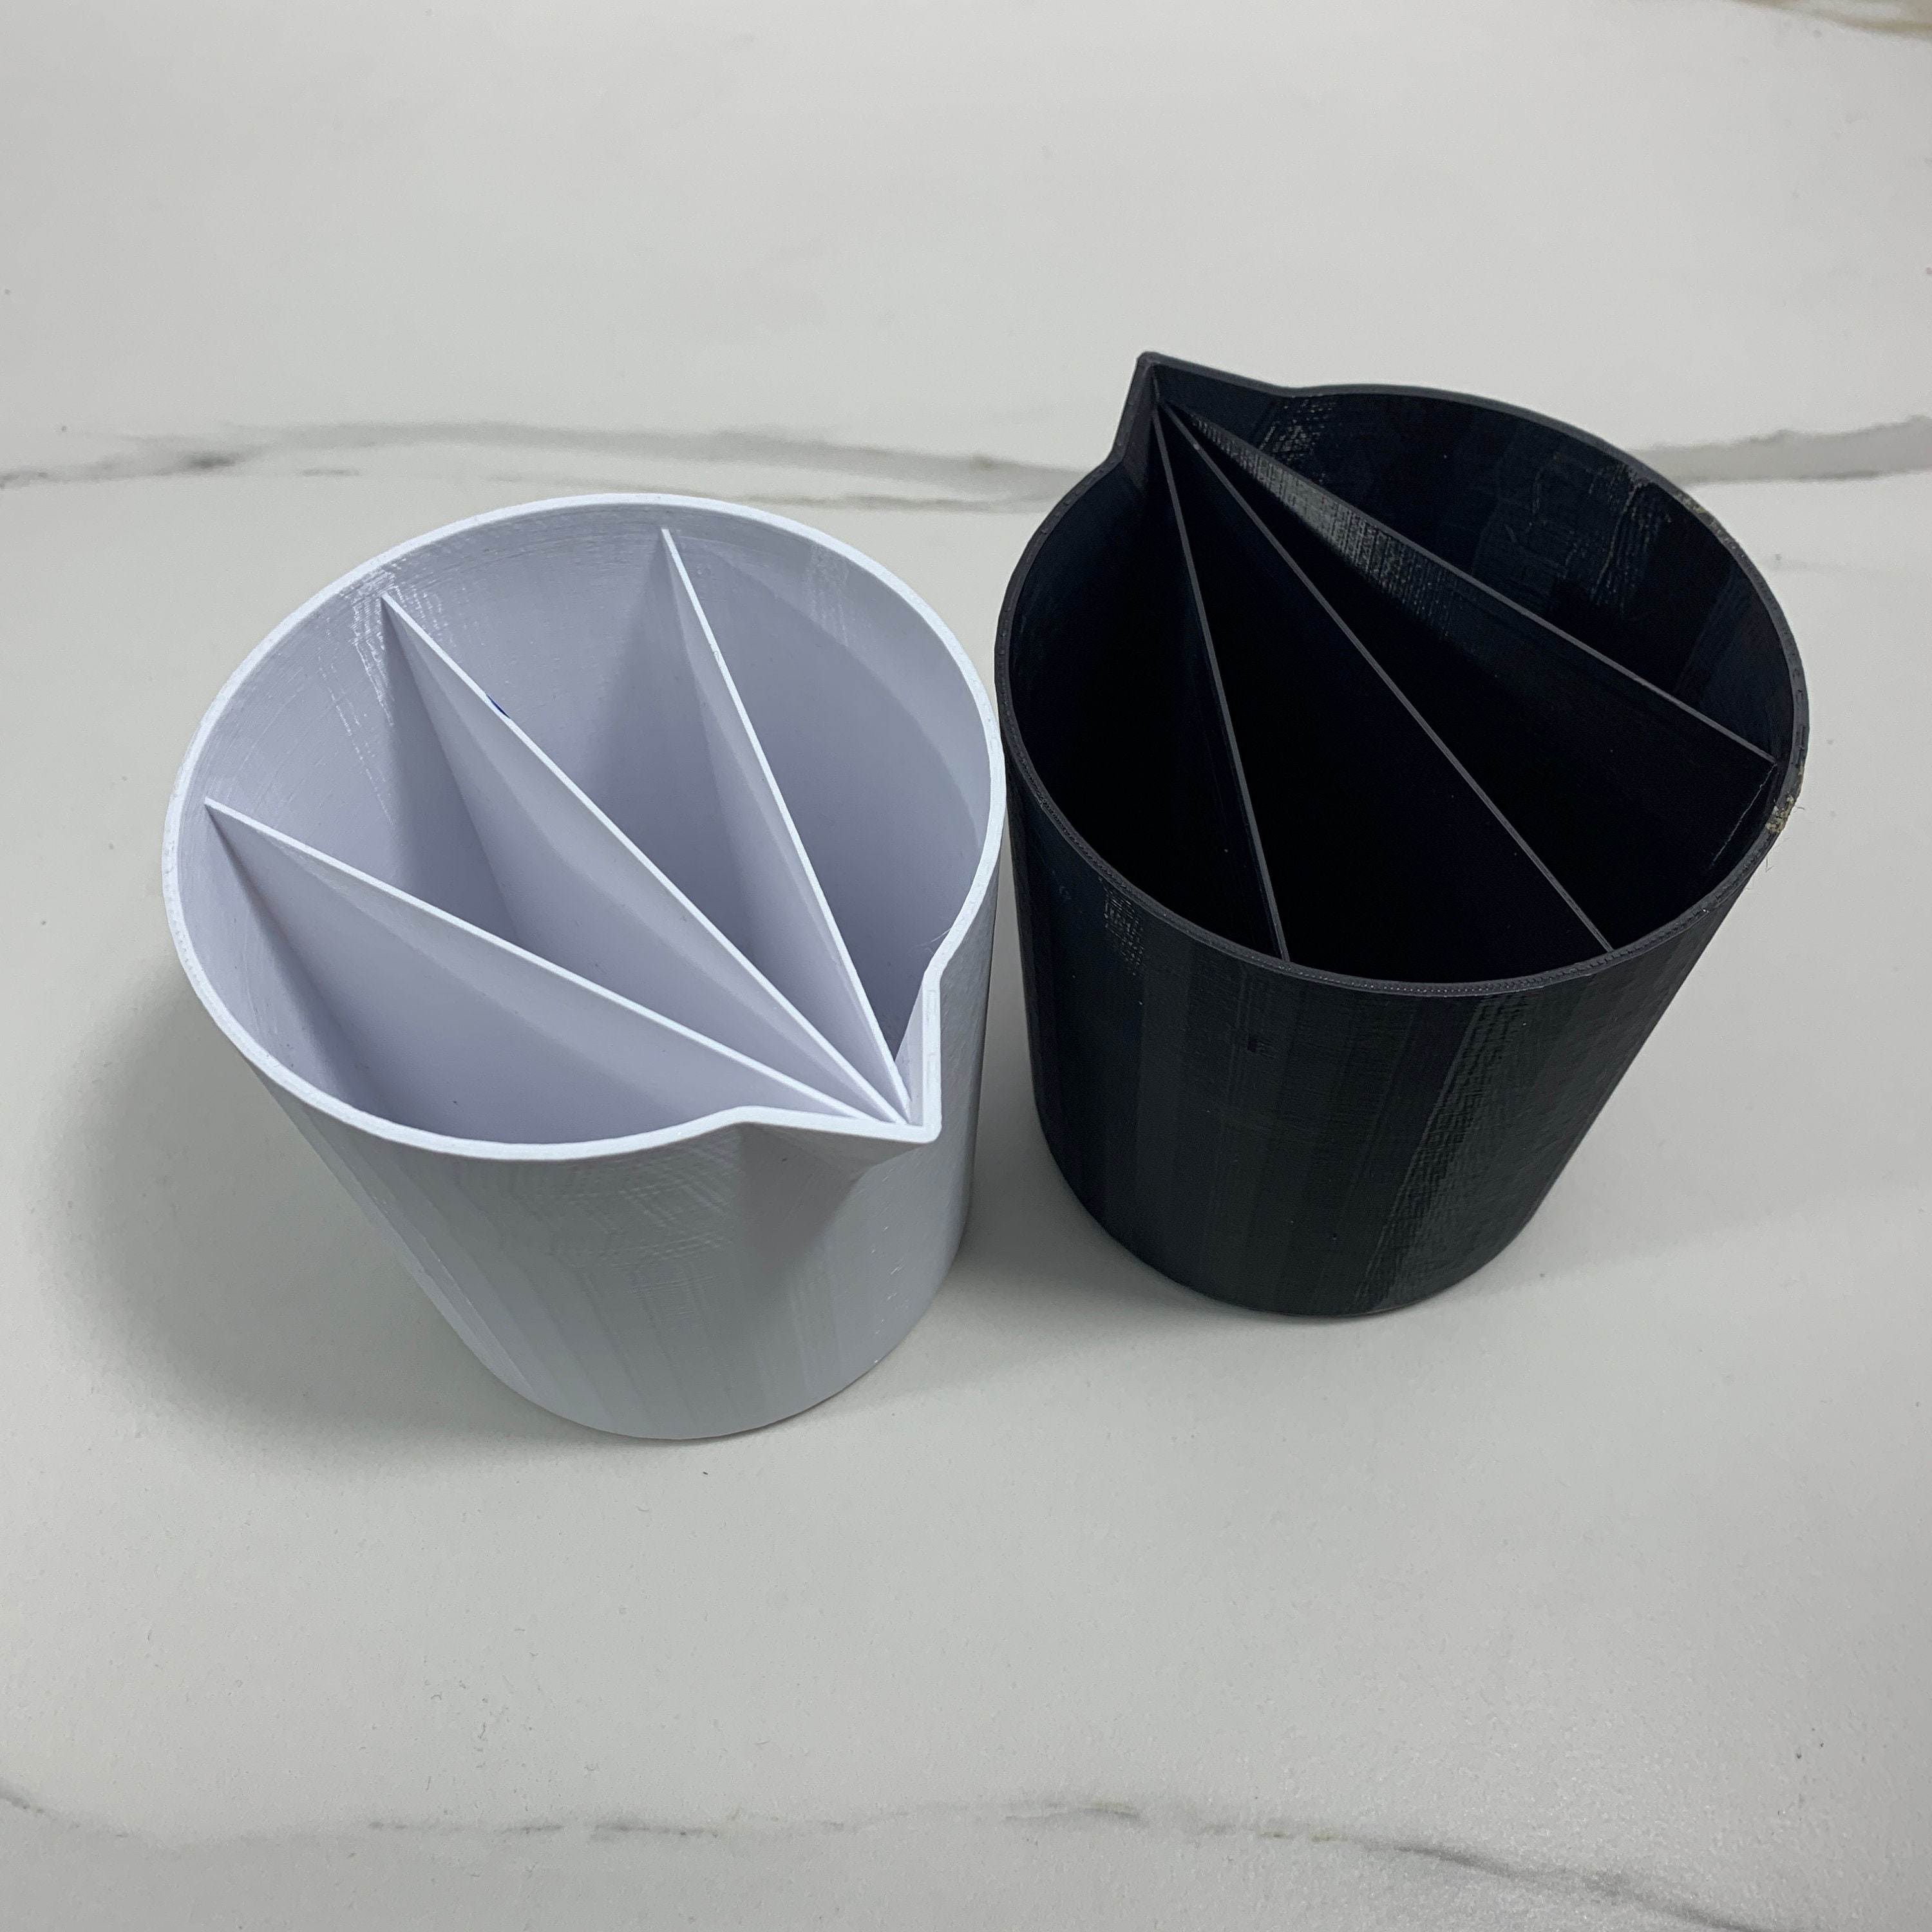  KONTONTY 3pcs Paint Pouring Cup Acrylic Pour Split Cup Resin  Paint Cups Resin Split Cups Silicone Oil for Acrylic Pouring Pour Painting  Supplies Flotrol Silica Gel White Container Painted